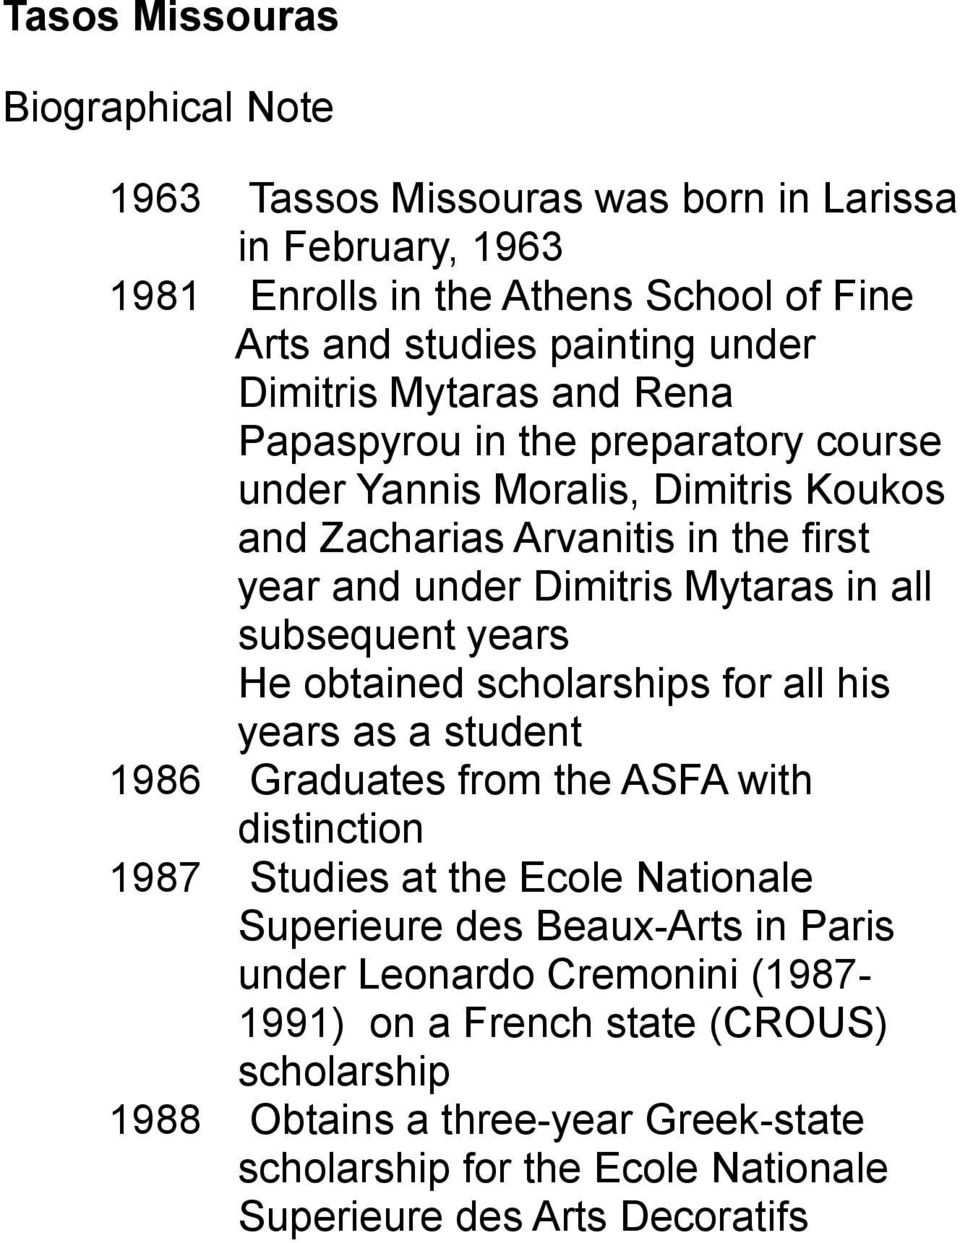 years He obtained scholarships for all his years as a student 1986 Graduates from the ASFA with distinction 1987 Studies at the Ecole Νationale Superieure des Beaux-Arts in Paris